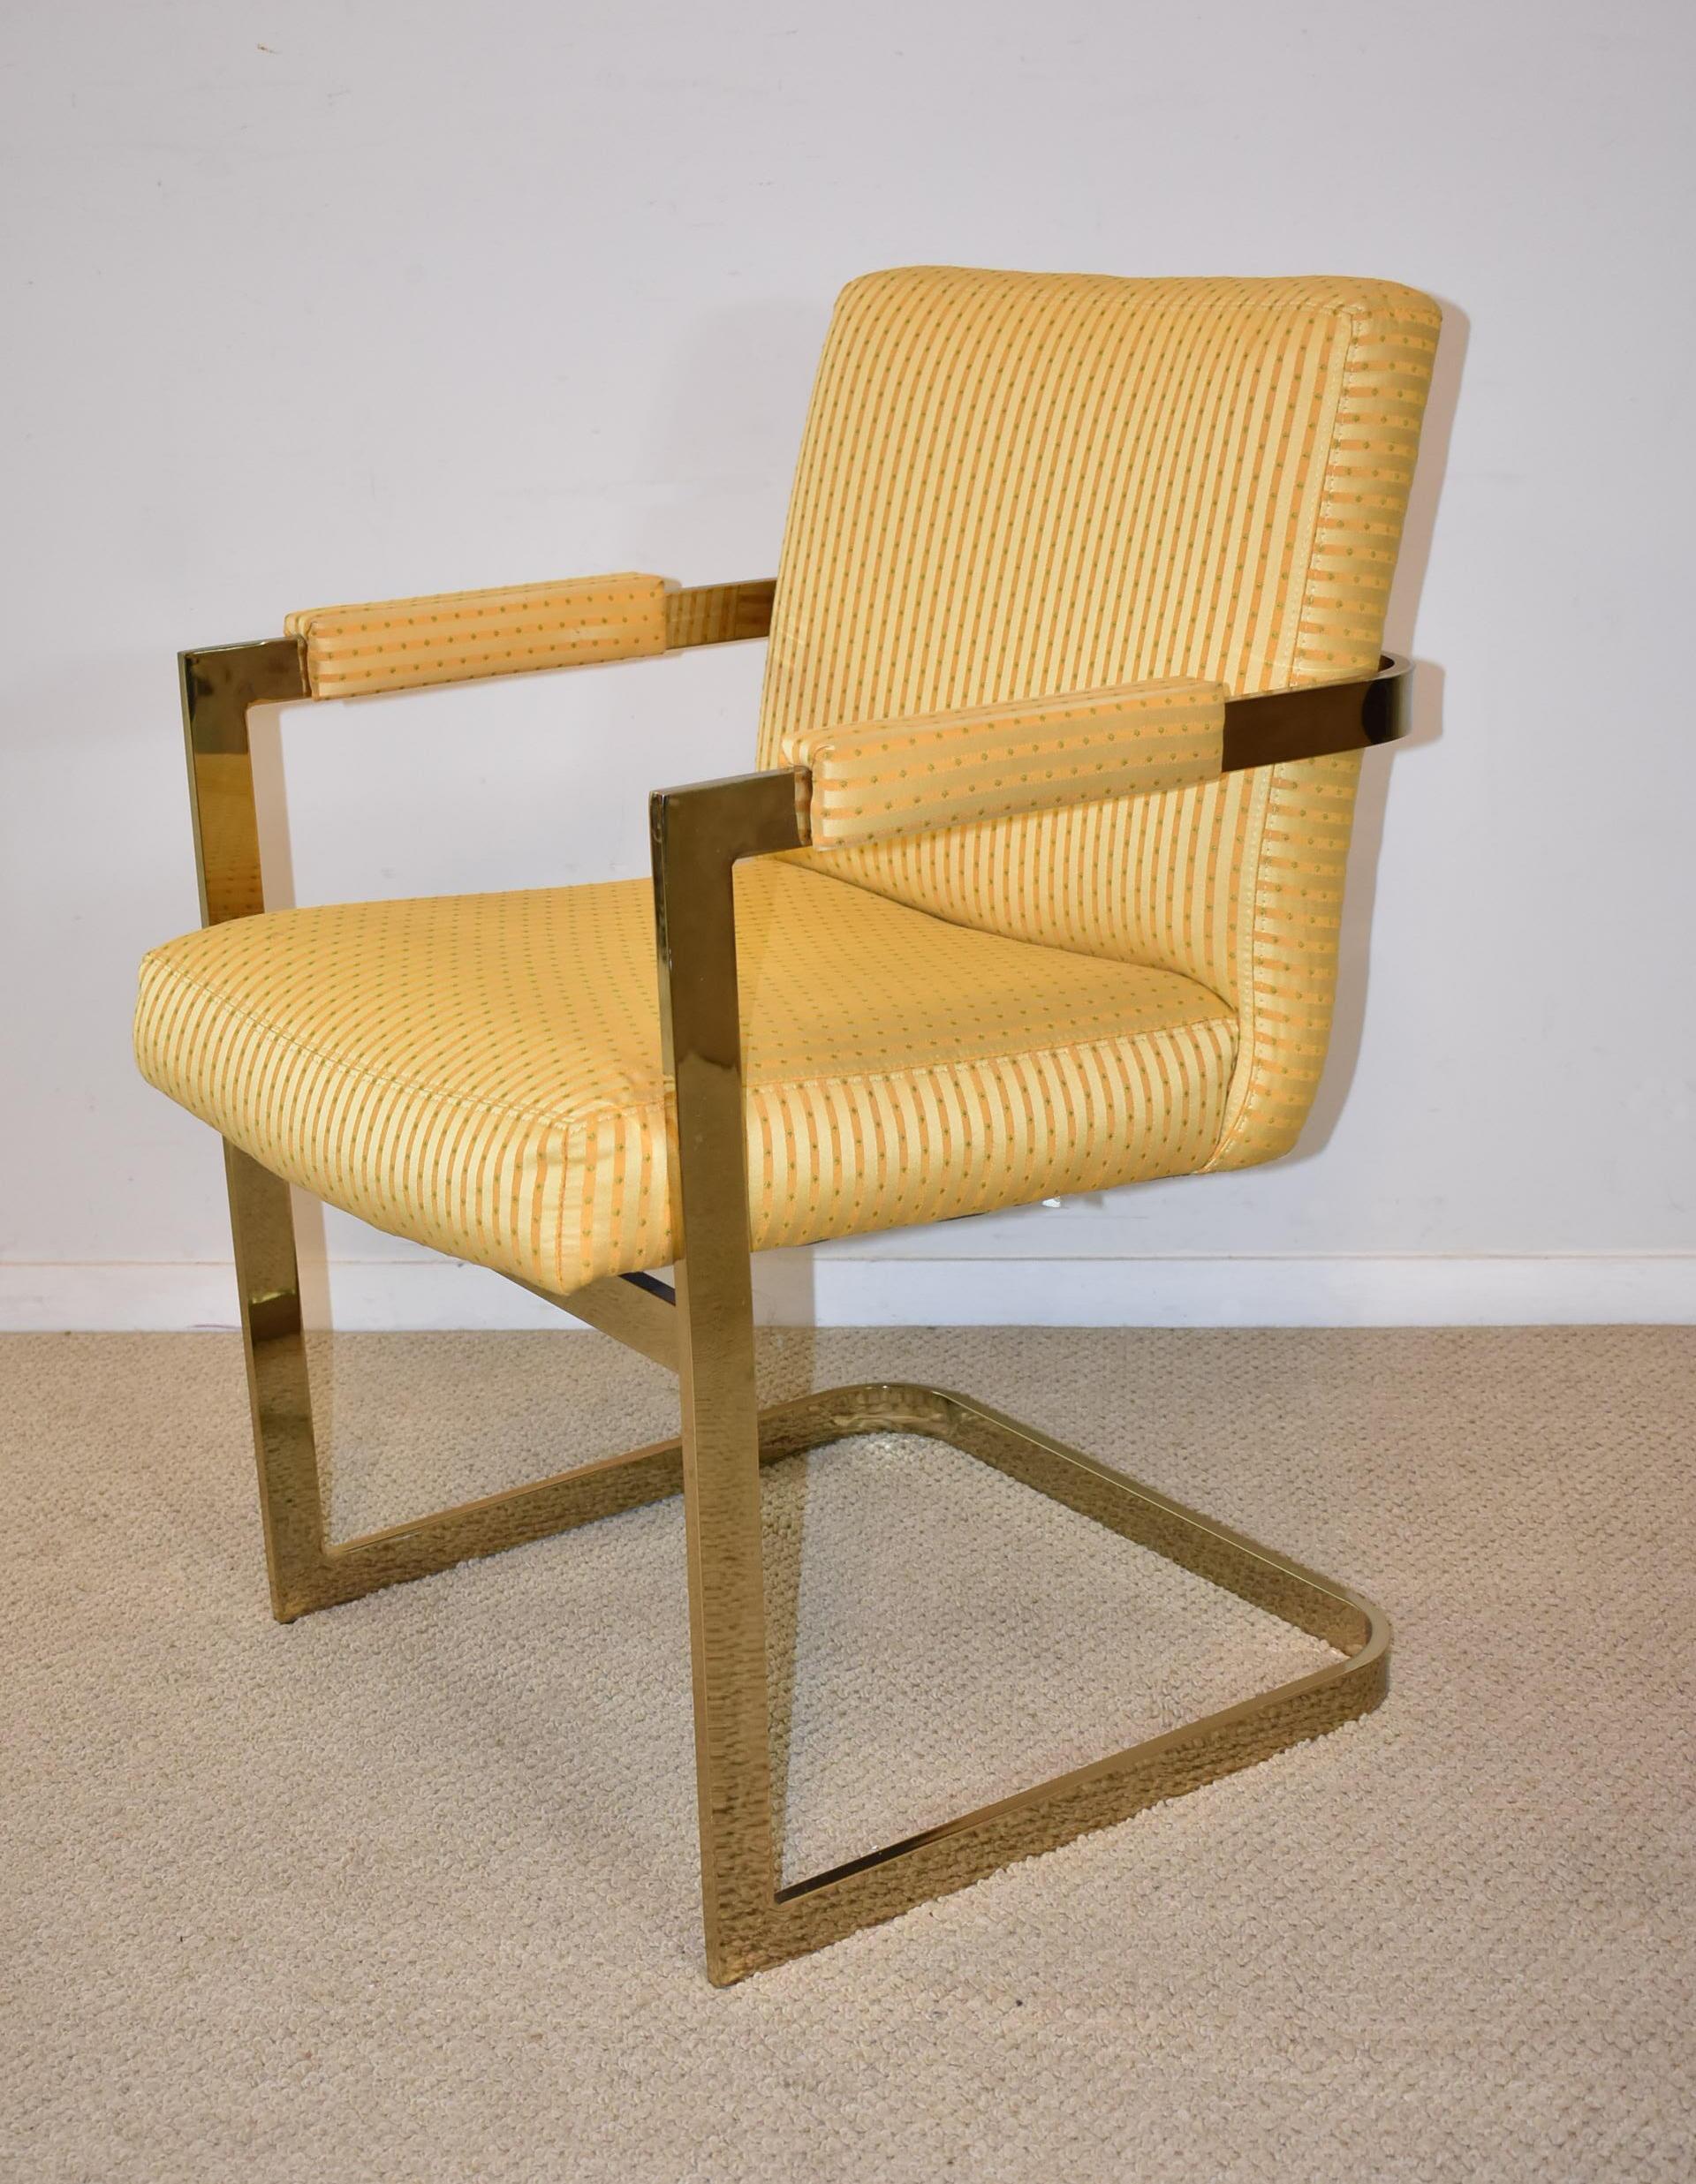 Four vintage, circa 1970s Milo Baughman flatbar cantilever armchairs. Brass frame with upholstered seat, back and arms.